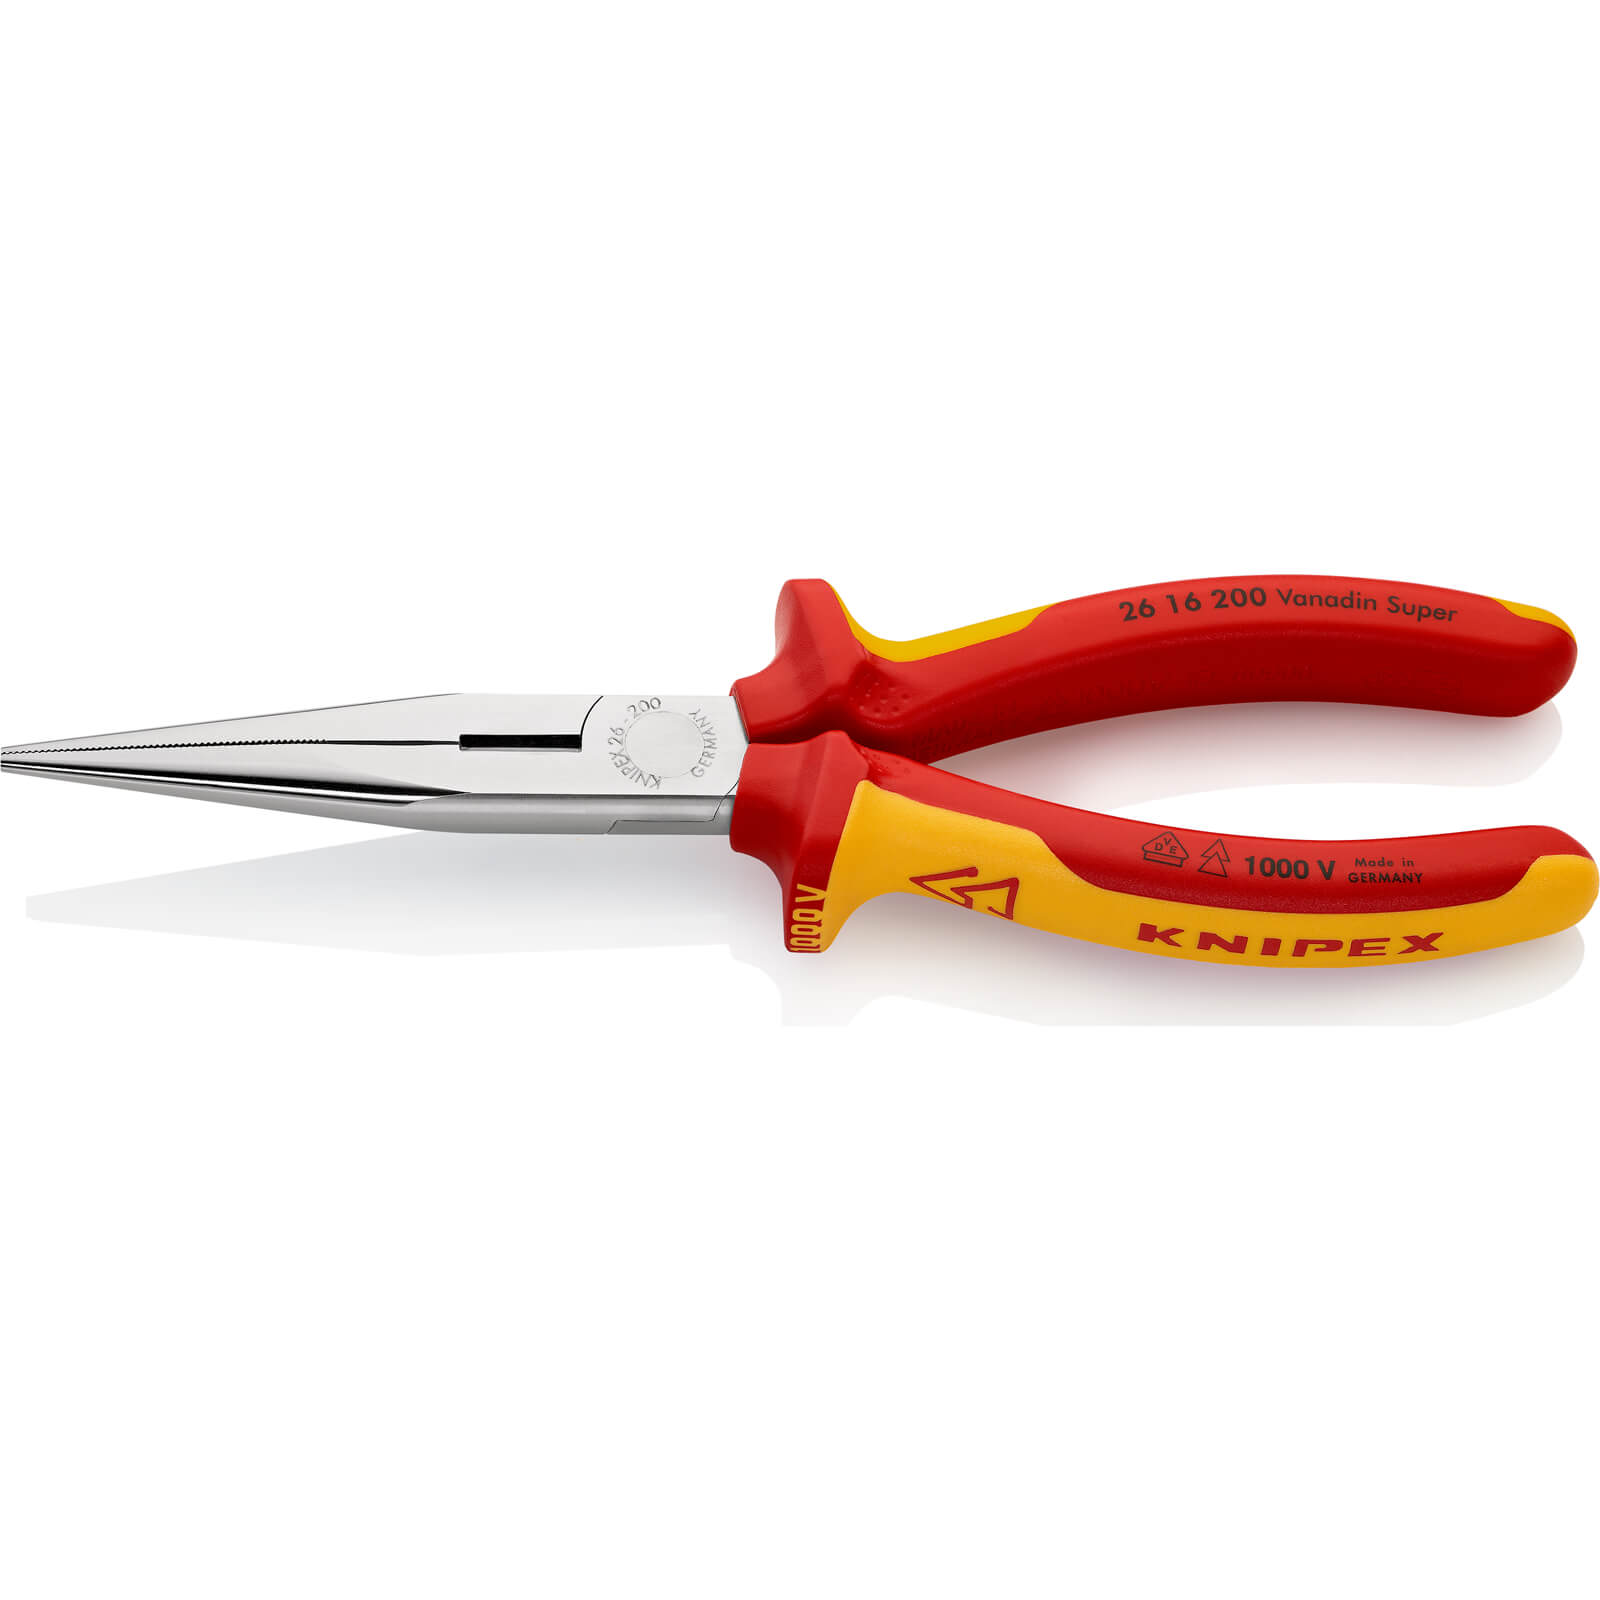 Photo of Knipex 26 16 Vde Insulated Long Nose Side Cutting Pliers 200mm